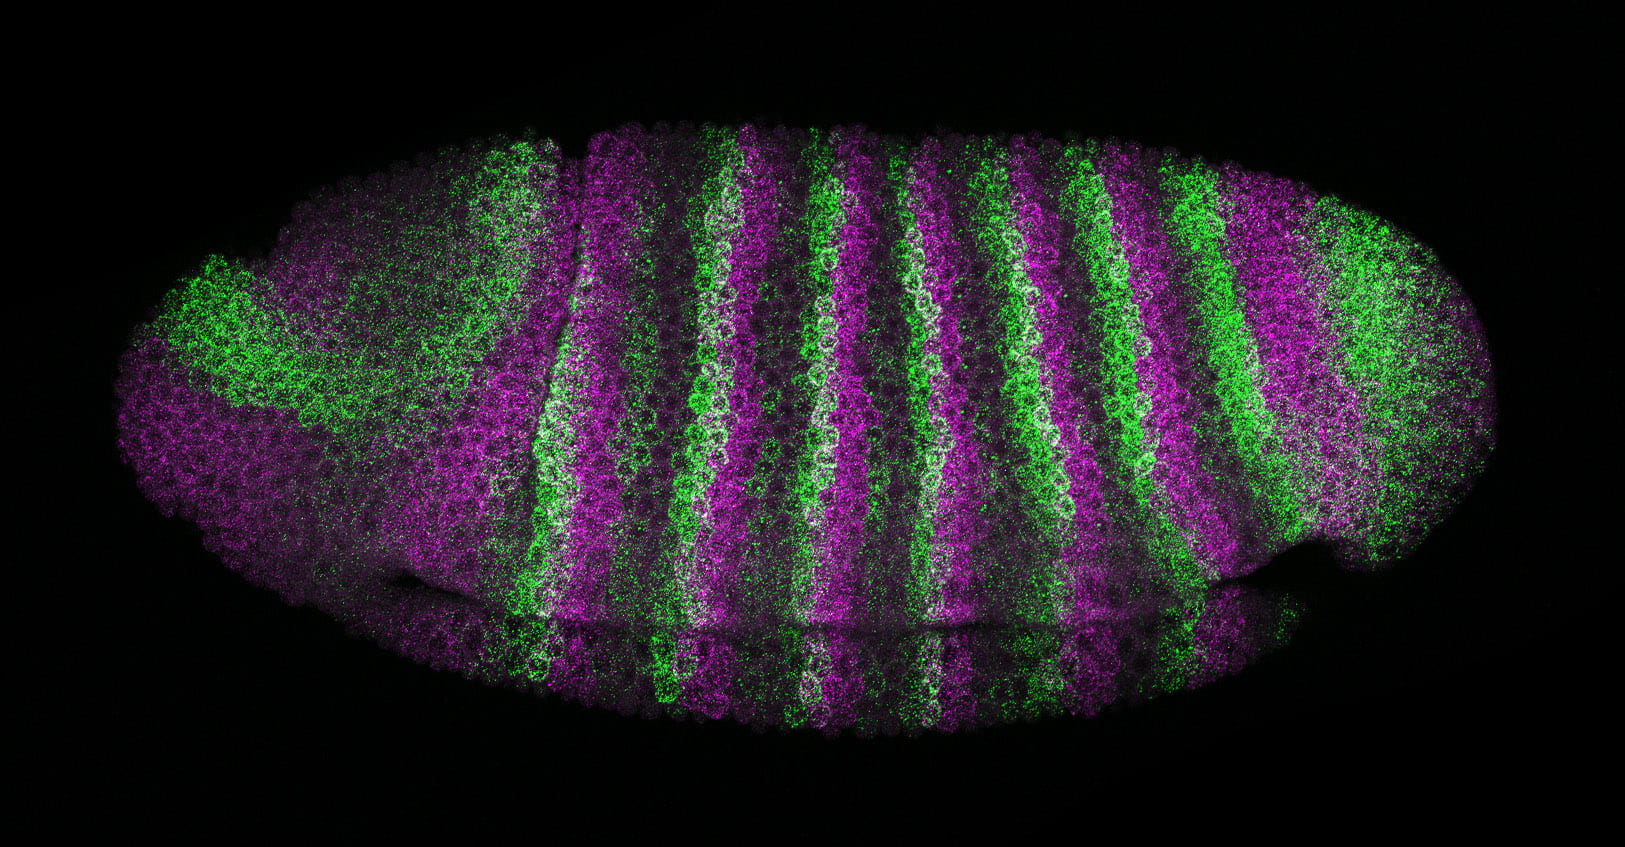 This fruit fly embryo has been treated to reveal the mRNA expression patterns of two cell surface receptors.